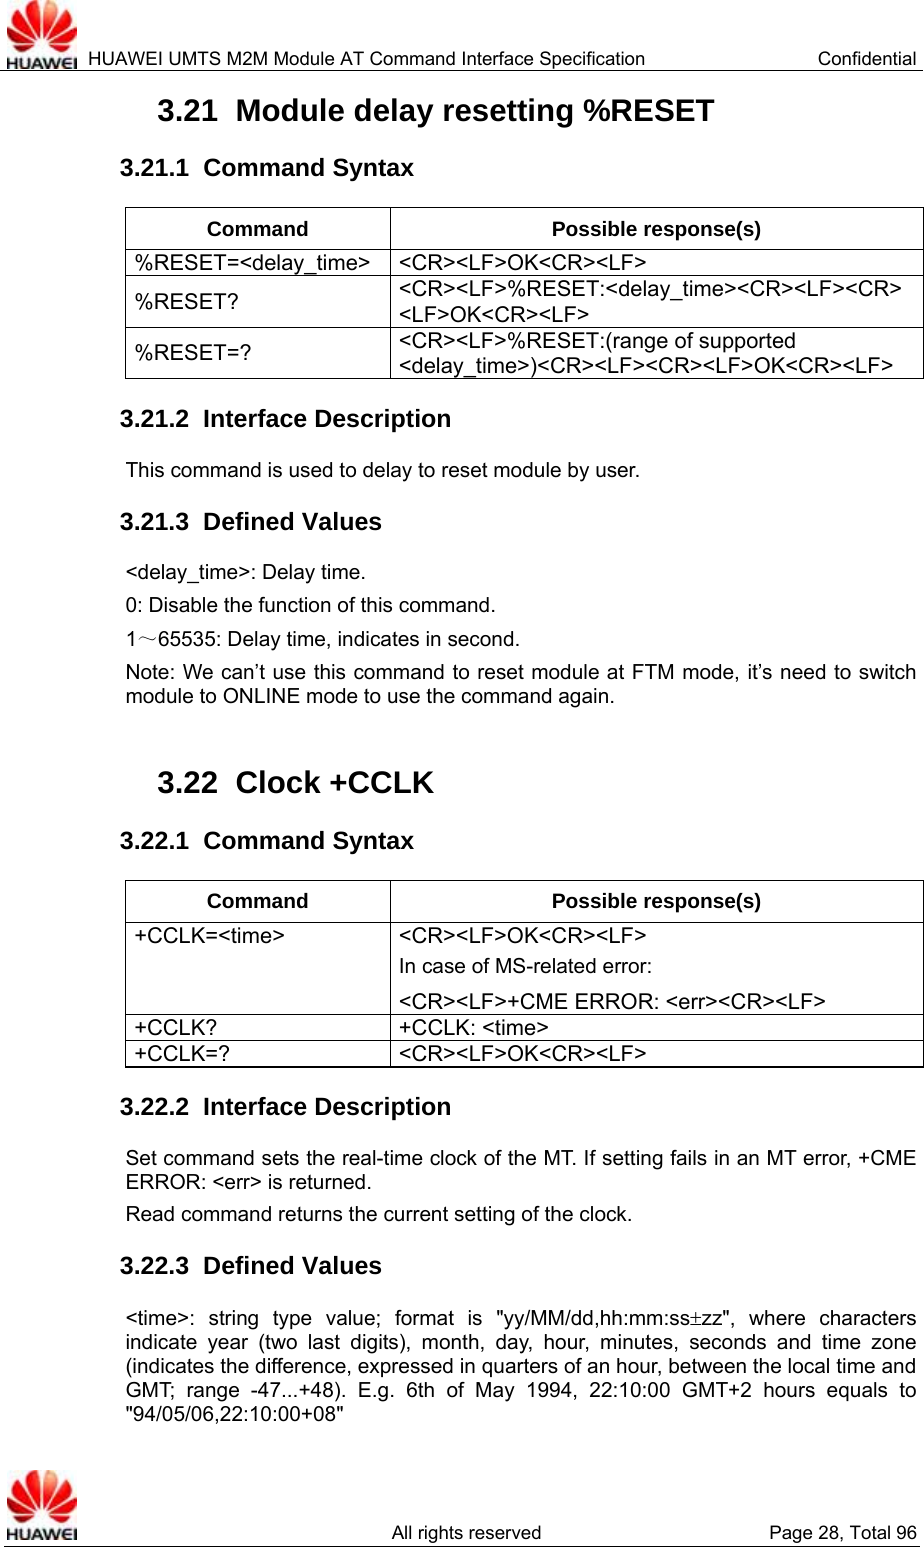  HUAWEI UMTS M2M Module AT Command Interface Specification  Confidential   All rights reserved  Page 28, Total 96 3.21  Module delay resetting %RESET   3.21.1  Command Syntax Command Possible response(s) %RESET=&lt;delay_time&gt; &lt;CR&gt;&lt;LF&gt;OK&lt;CR&gt;&lt;LF&gt; %RESET?  &lt;CR&gt;&lt;LF&gt;%RESET:&lt;delay_time&gt;&lt;CR&gt;&lt;LF&gt;&lt;CR&gt;&lt;LF&gt;OK&lt;CR&gt;&lt;LF&gt; %RESET=?  &lt;CR&gt;&lt;LF&gt;%RESET:(range of supported &lt;delay_time&gt;)&lt;CR&gt;&lt;LF&gt;&lt;CR&gt;&lt;LF&gt;OK&lt;CR&gt;&lt;LF&gt; 3.21.2  Interface Description This command is used to delay to reset module by user. 3.21.3  Defined Values &lt;delay_time&gt;: Delay time.   0: Disable the function of this command. 1～65535: Delay time, indicates in second. Note: We can’t use this command to reset module at FTM mode, it’s need to switch module to ONLINE mode to use the command again.  3.22  Clock +CCLK 3.22.1  Command Syntax Command Possible response(s) +CCLK=&lt;time&gt; &lt;CR&gt;&lt;LF&gt;OK&lt;CR&gt;&lt;LF&gt; In case of MS-related error: &lt;CR&gt;&lt;LF&gt;+CME ERROR: &lt;err&gt;&lt;CR&gt;&lt;LF&gt; +CCLK? +CCLK: &lt;time&gt; +CCLK=? &lt;CR&gt;&lt;LF&gt;OK&lt;CR&gt;&lt;LF&gt; 3.22.2  Interface Description Set command sets the real-time clock of the MT. If setting fails in an MT error, +CME ERROR: &lt;err&gt; is returned.   Read command returns the current setting of the clock. 3.22.3  Defined Values &lt;time&gt;: string type value; format is &quot;yy/MM/dd,hh:mm:ss±zz&quot;, where characters indicate year (two last digits), month, day, hour, minutes, seconds and time zone (indicates the difference, expressed in quarters of an hour, between the local time and GMT; range -47...+48). E.g. 6th of May 1994, 22:10:00 GMT+2 hours equals to &quot;94/05/06,22:10:00+08&quot; 